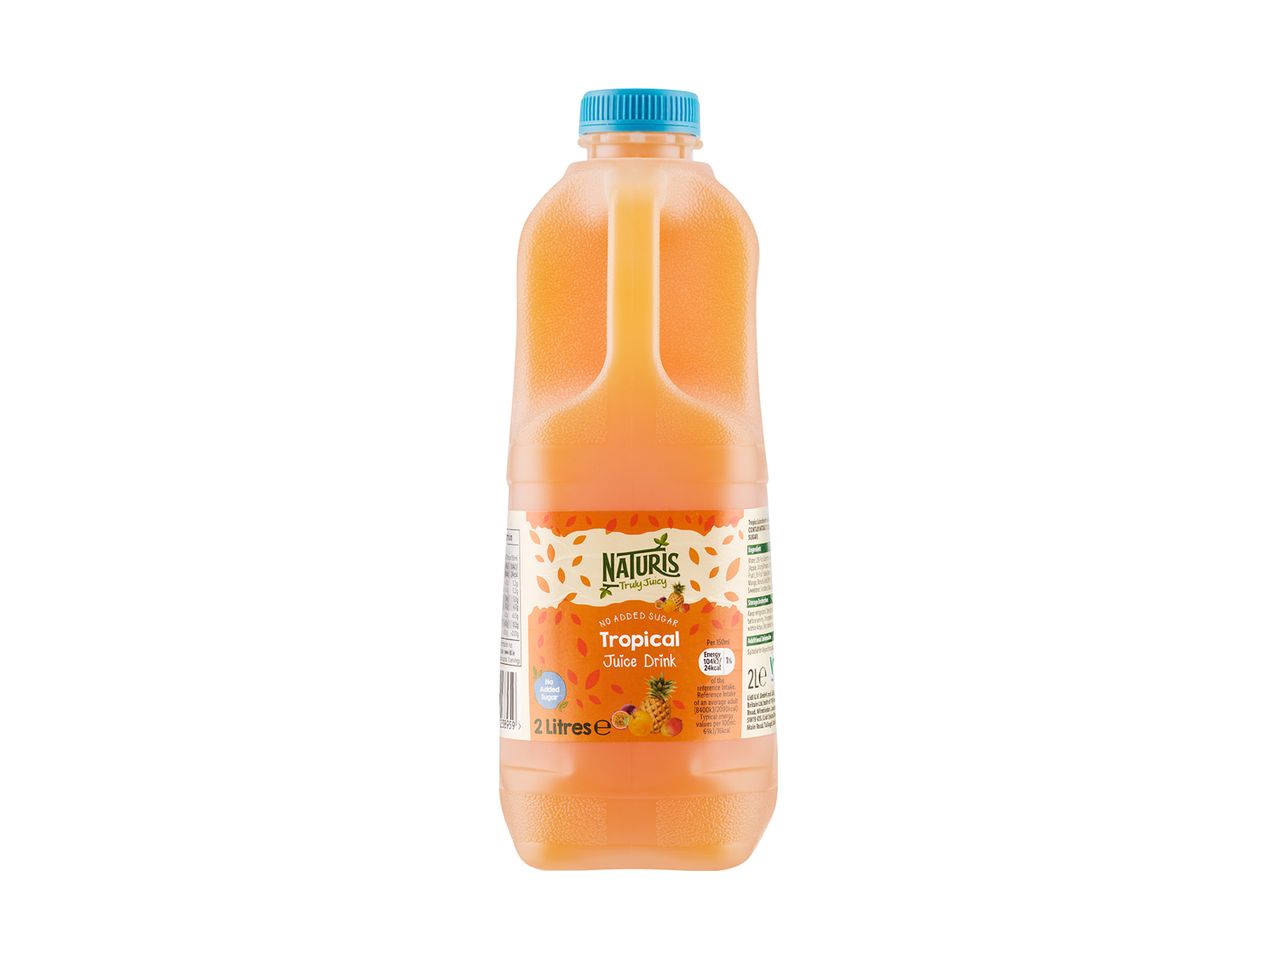 Go to full screen view: Naturis Tropical Juice Drink - Image 1